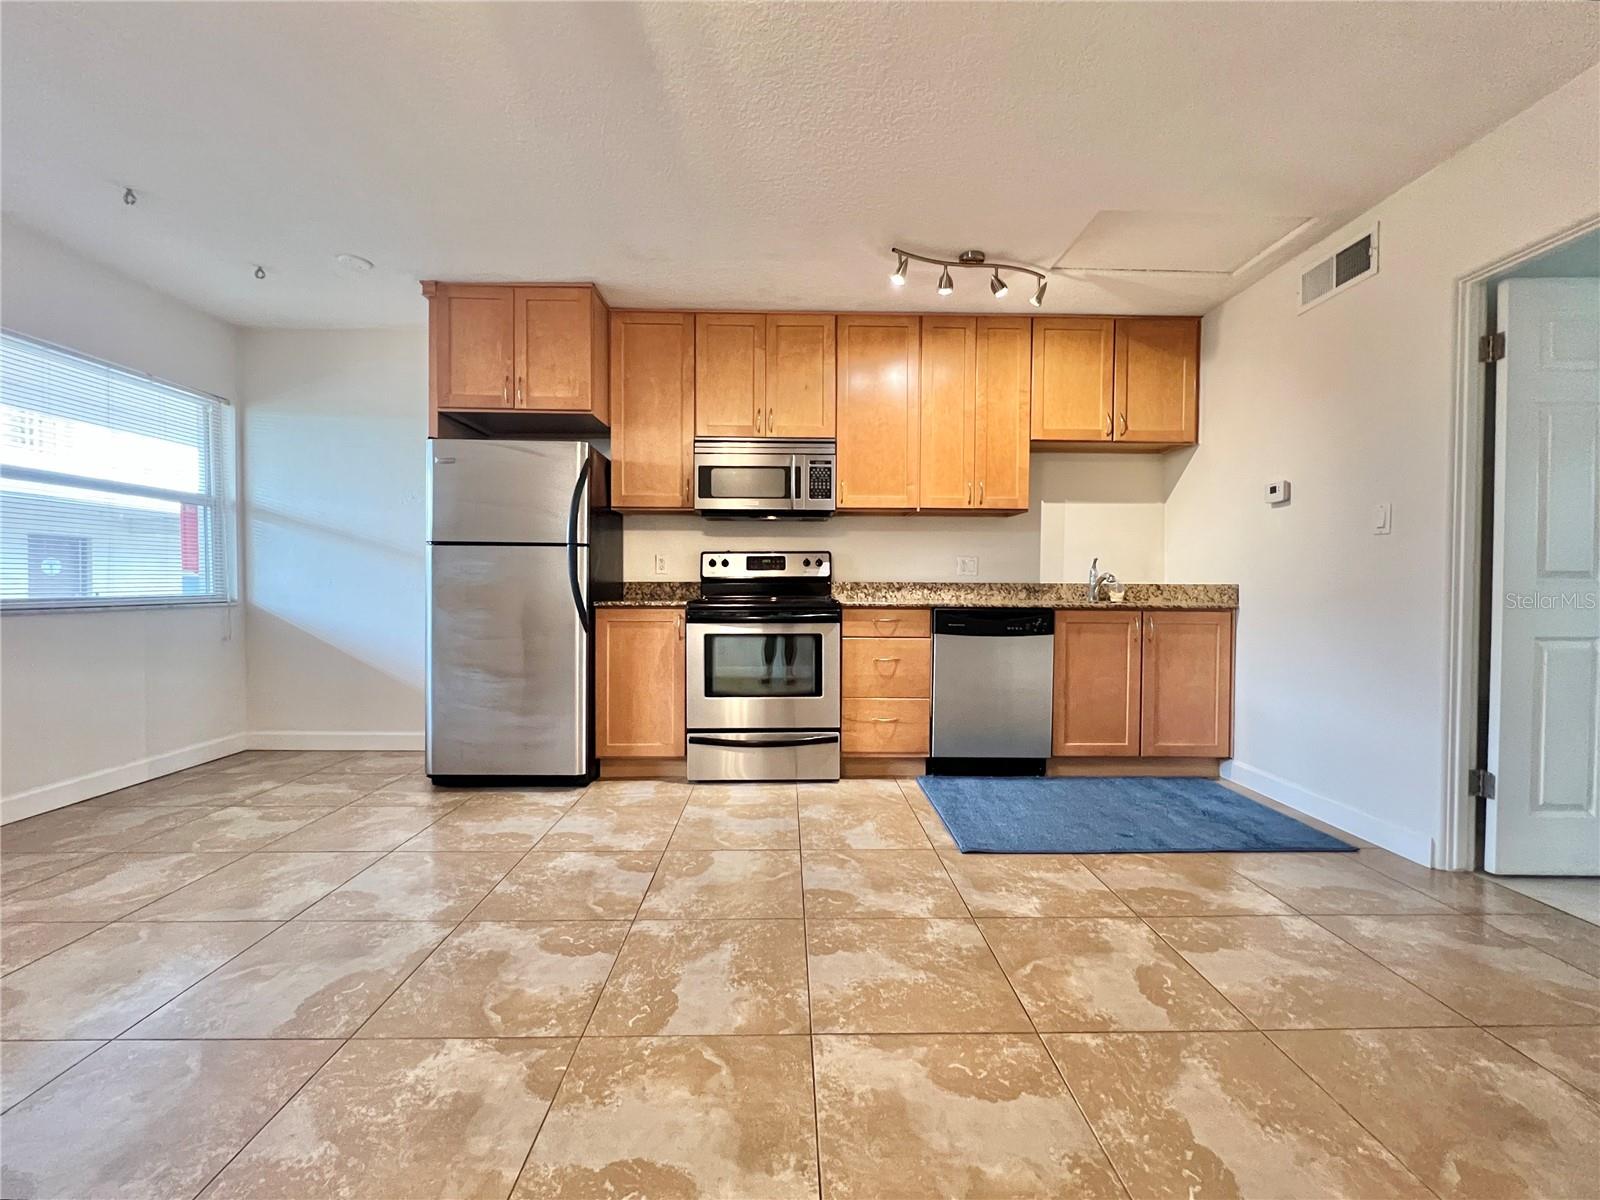 The kitchen features granite countertops and stainless steel appliances.